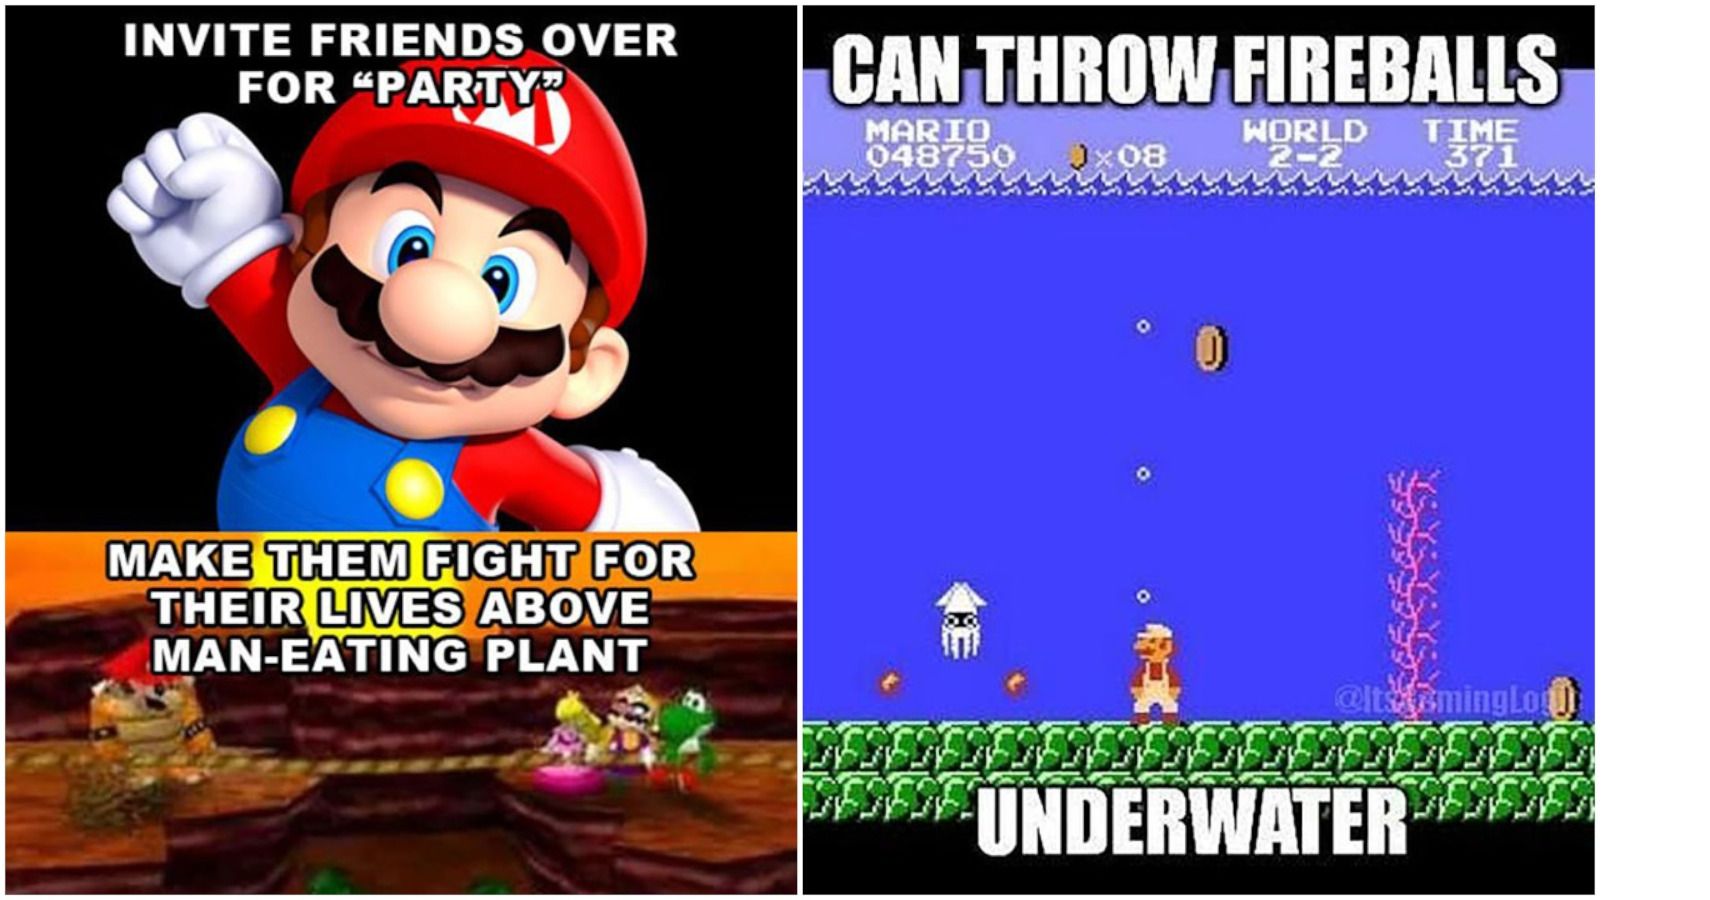 Funny Mario Memes For Kids